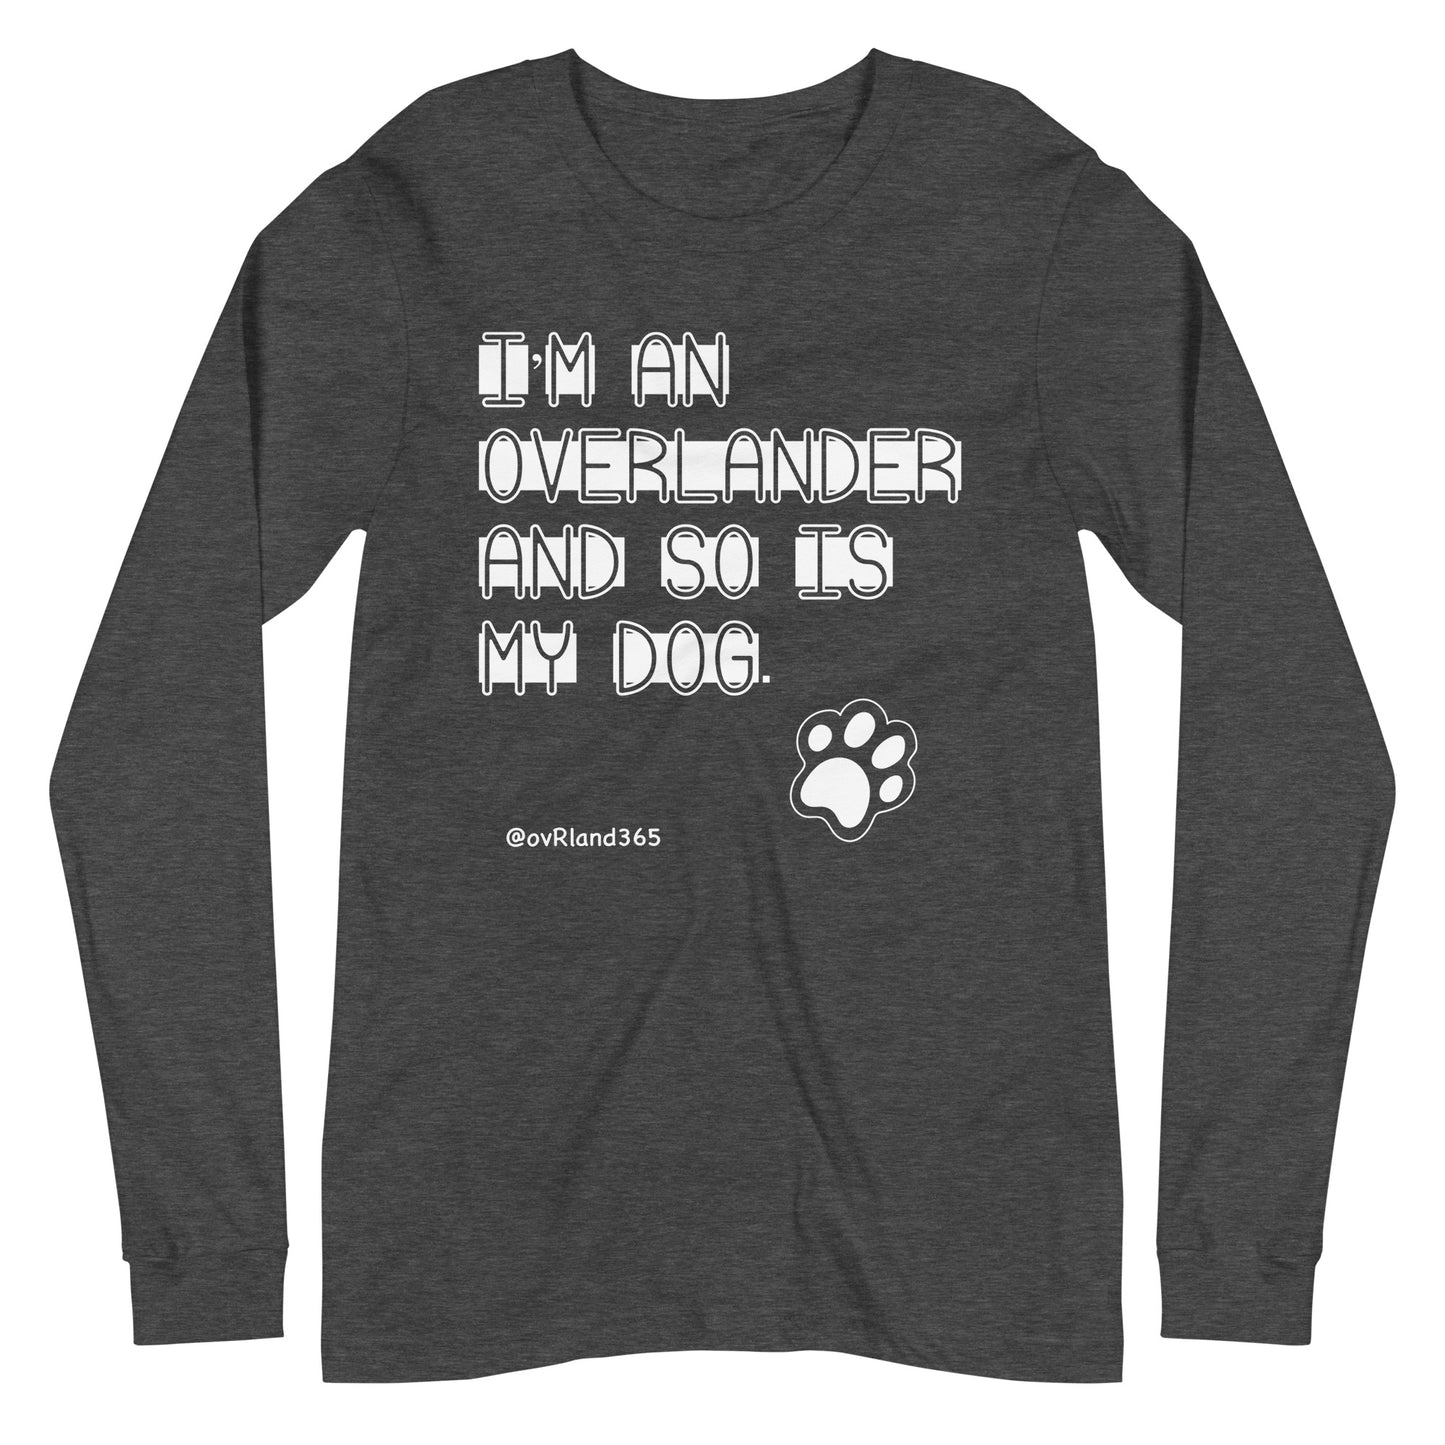 I'm an overlander and so is my dog. Dark Grey long-sleeve with a paw print. overland365.com